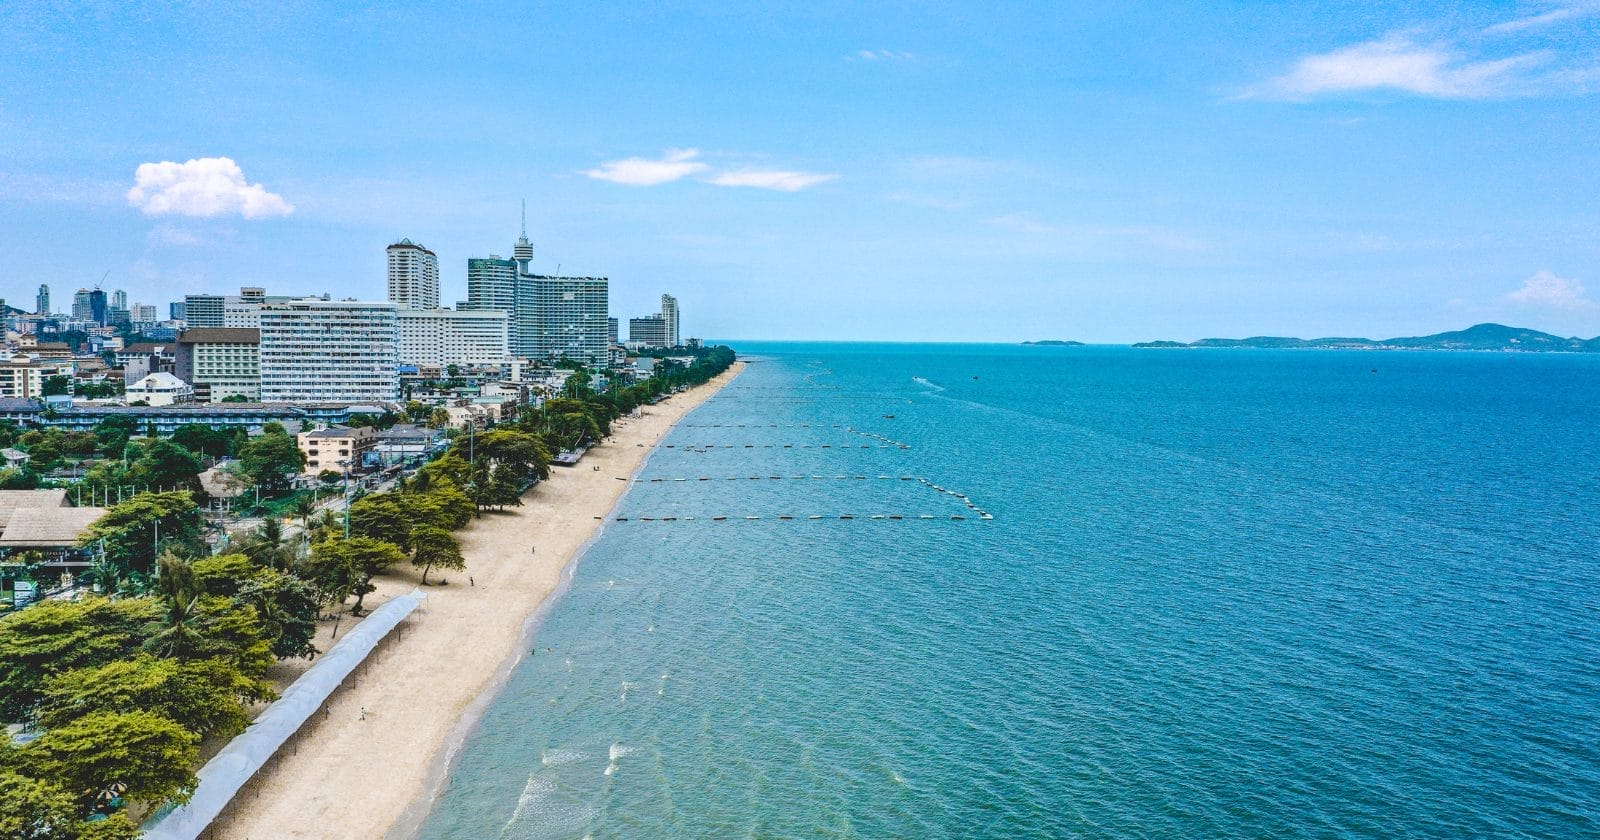 Can You Swim In Jomtien Beach? Find Out Here!